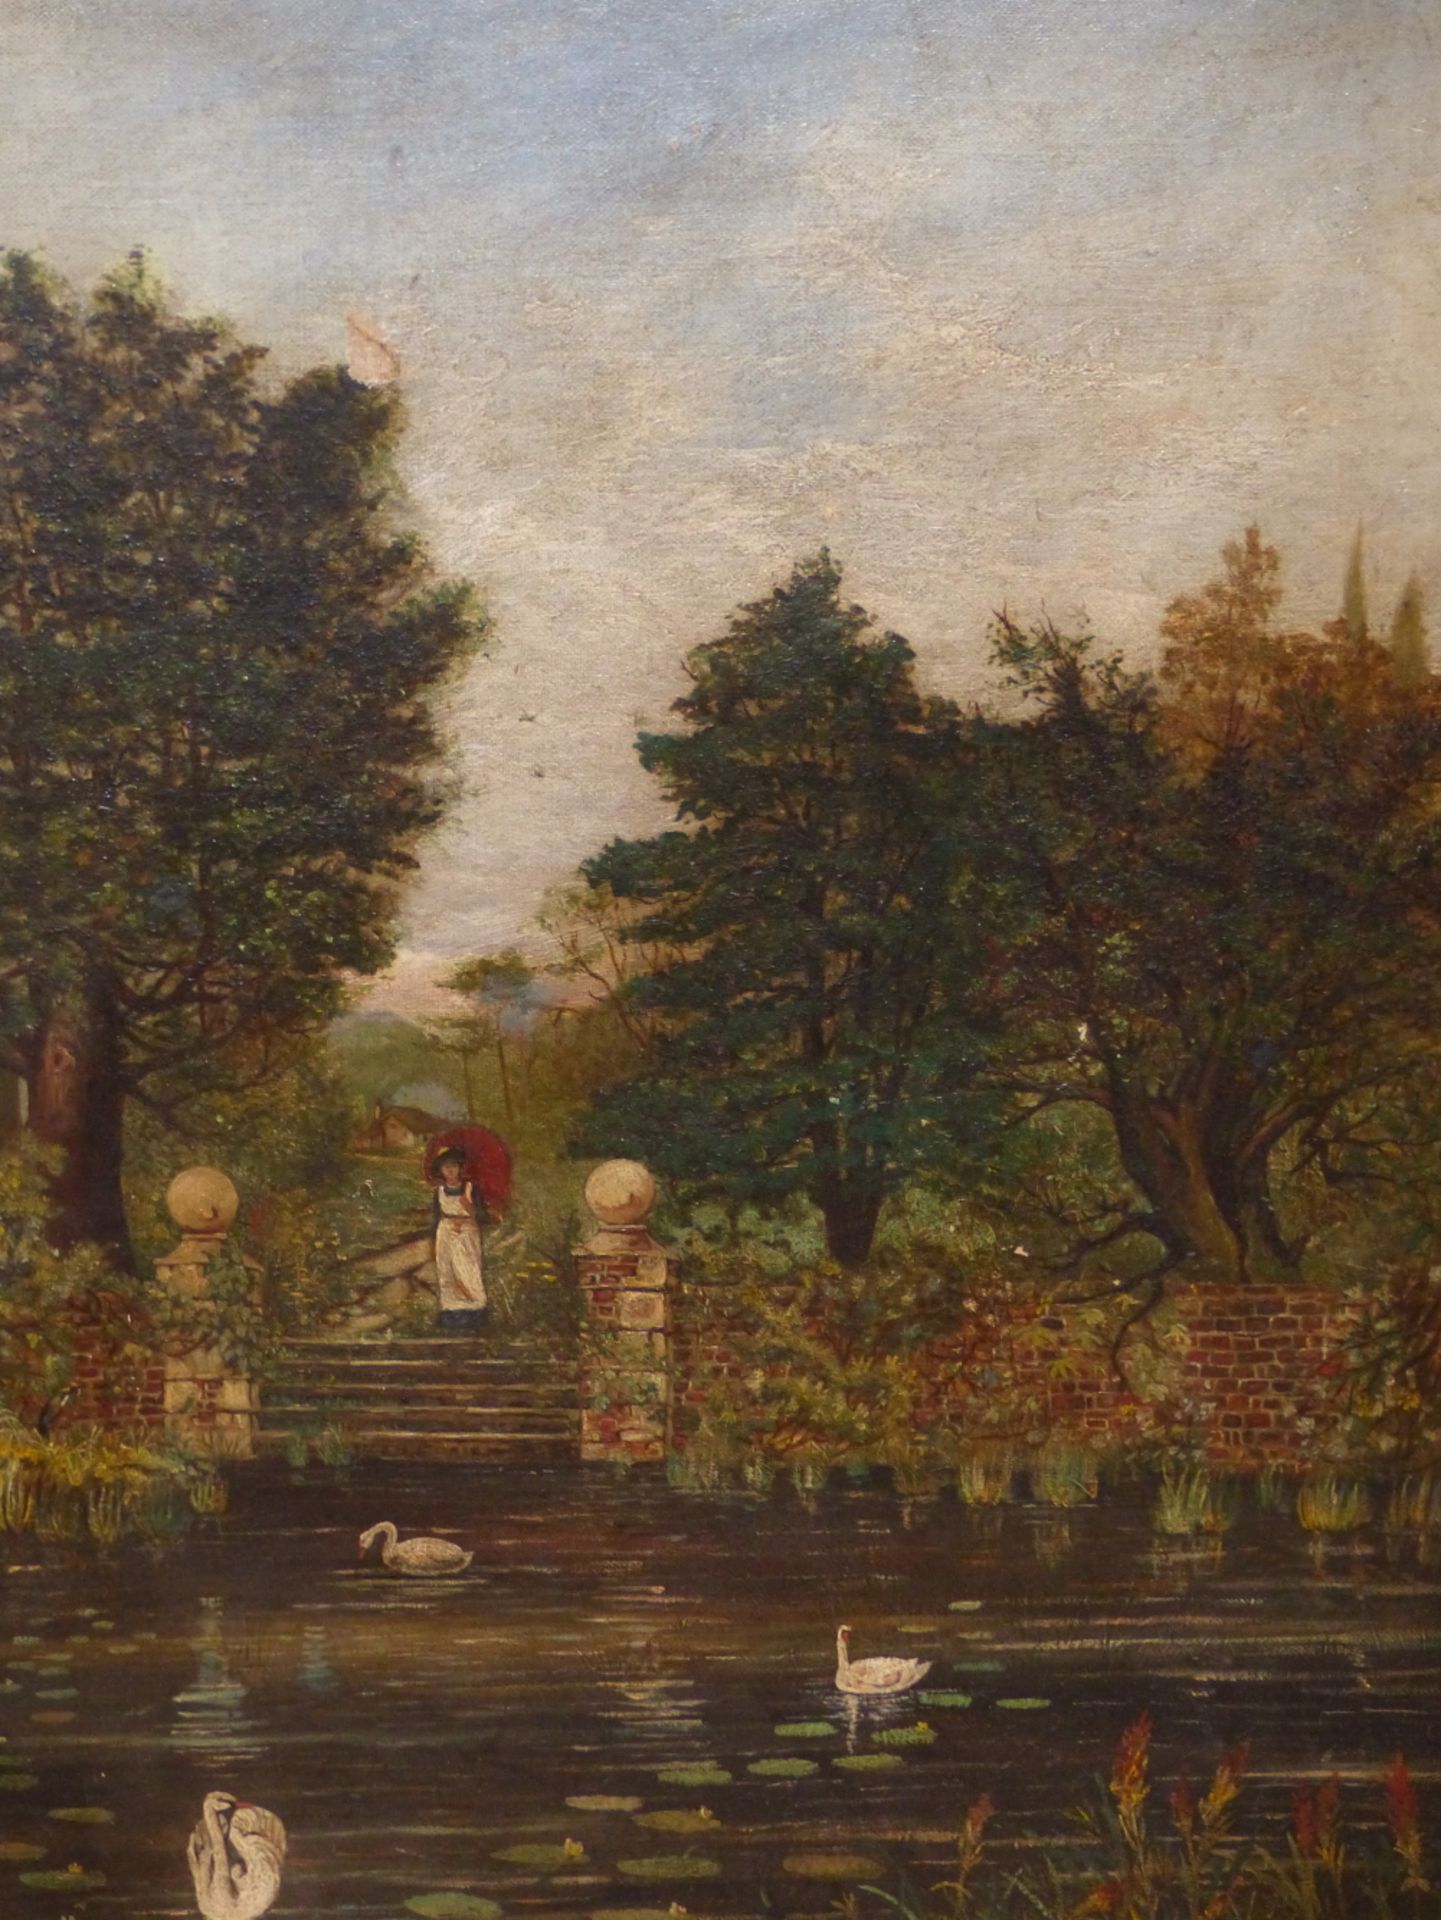 LATE 19th C. ENGLISH SCHOOL BY THE RIVER, OIL ON CANVAS. 69 x 51cms - Image 2 of 4